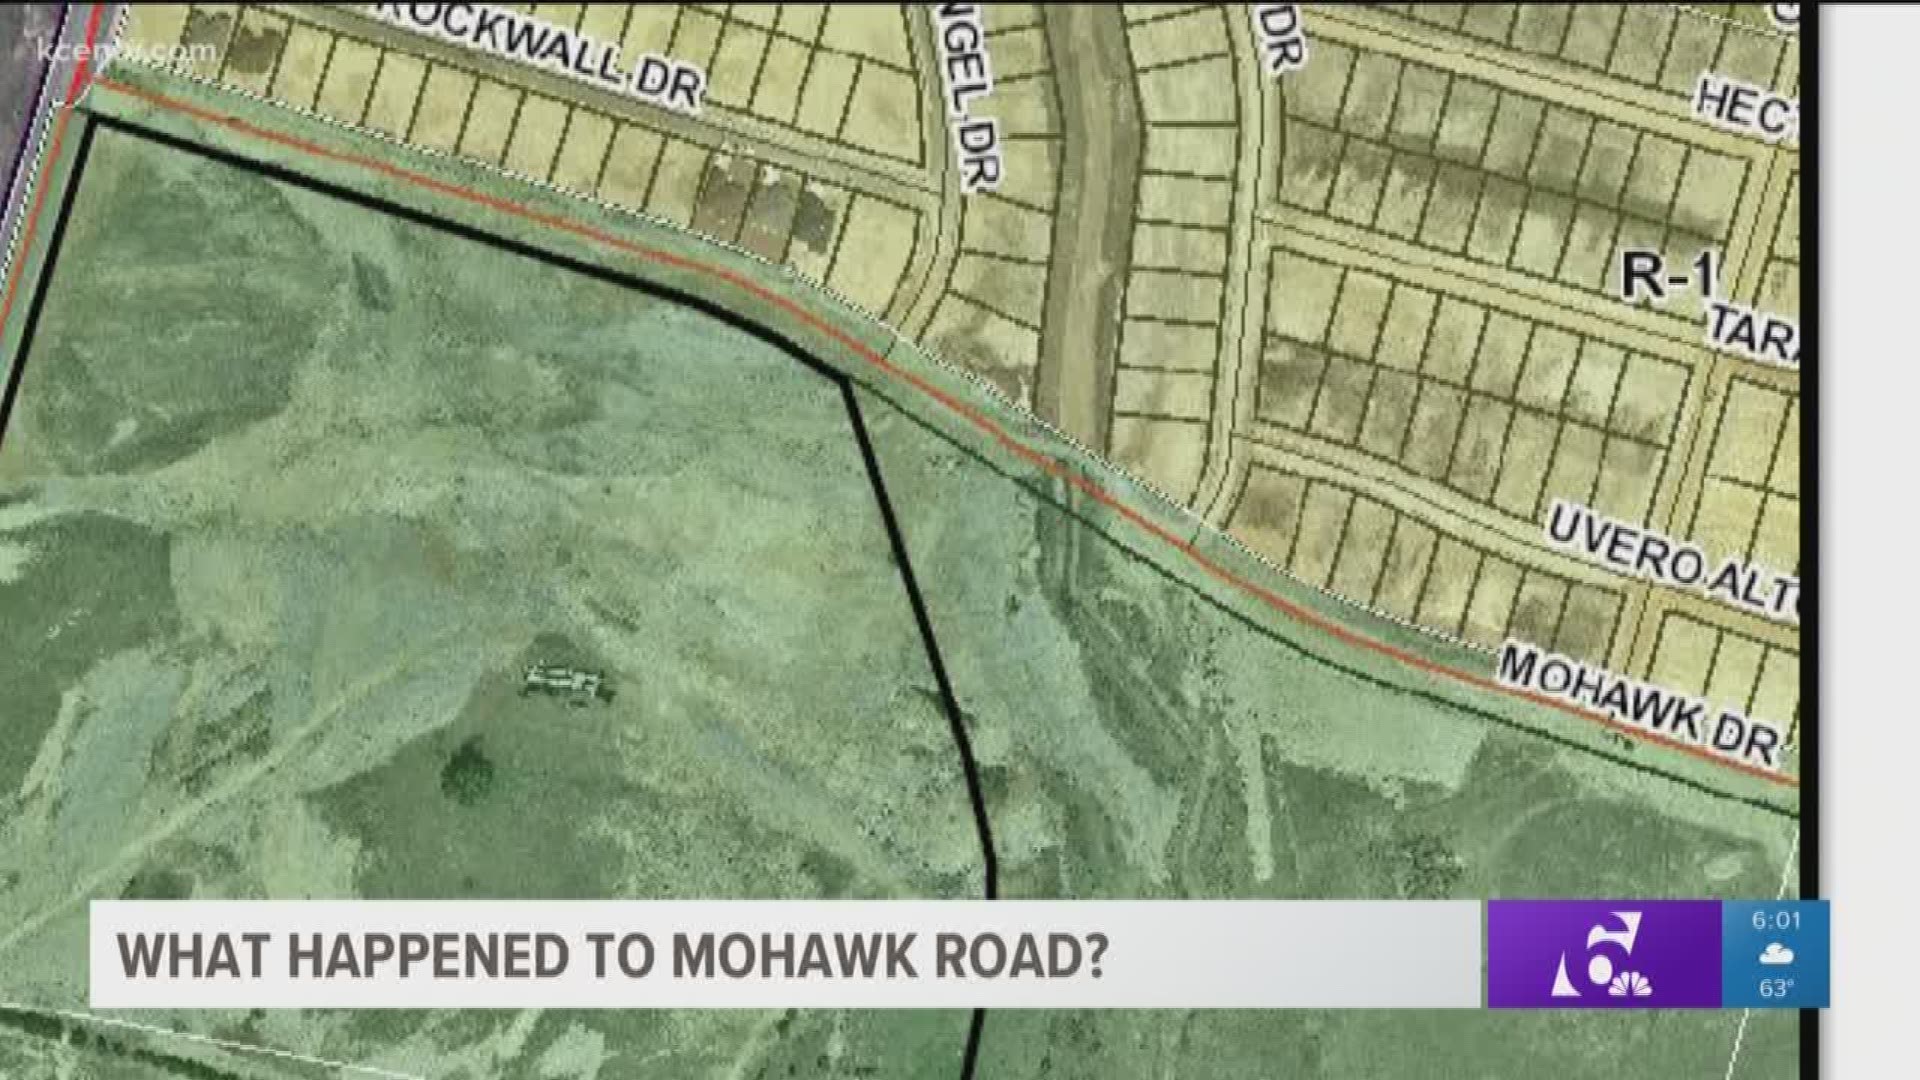 What happened to Mohawk Road?